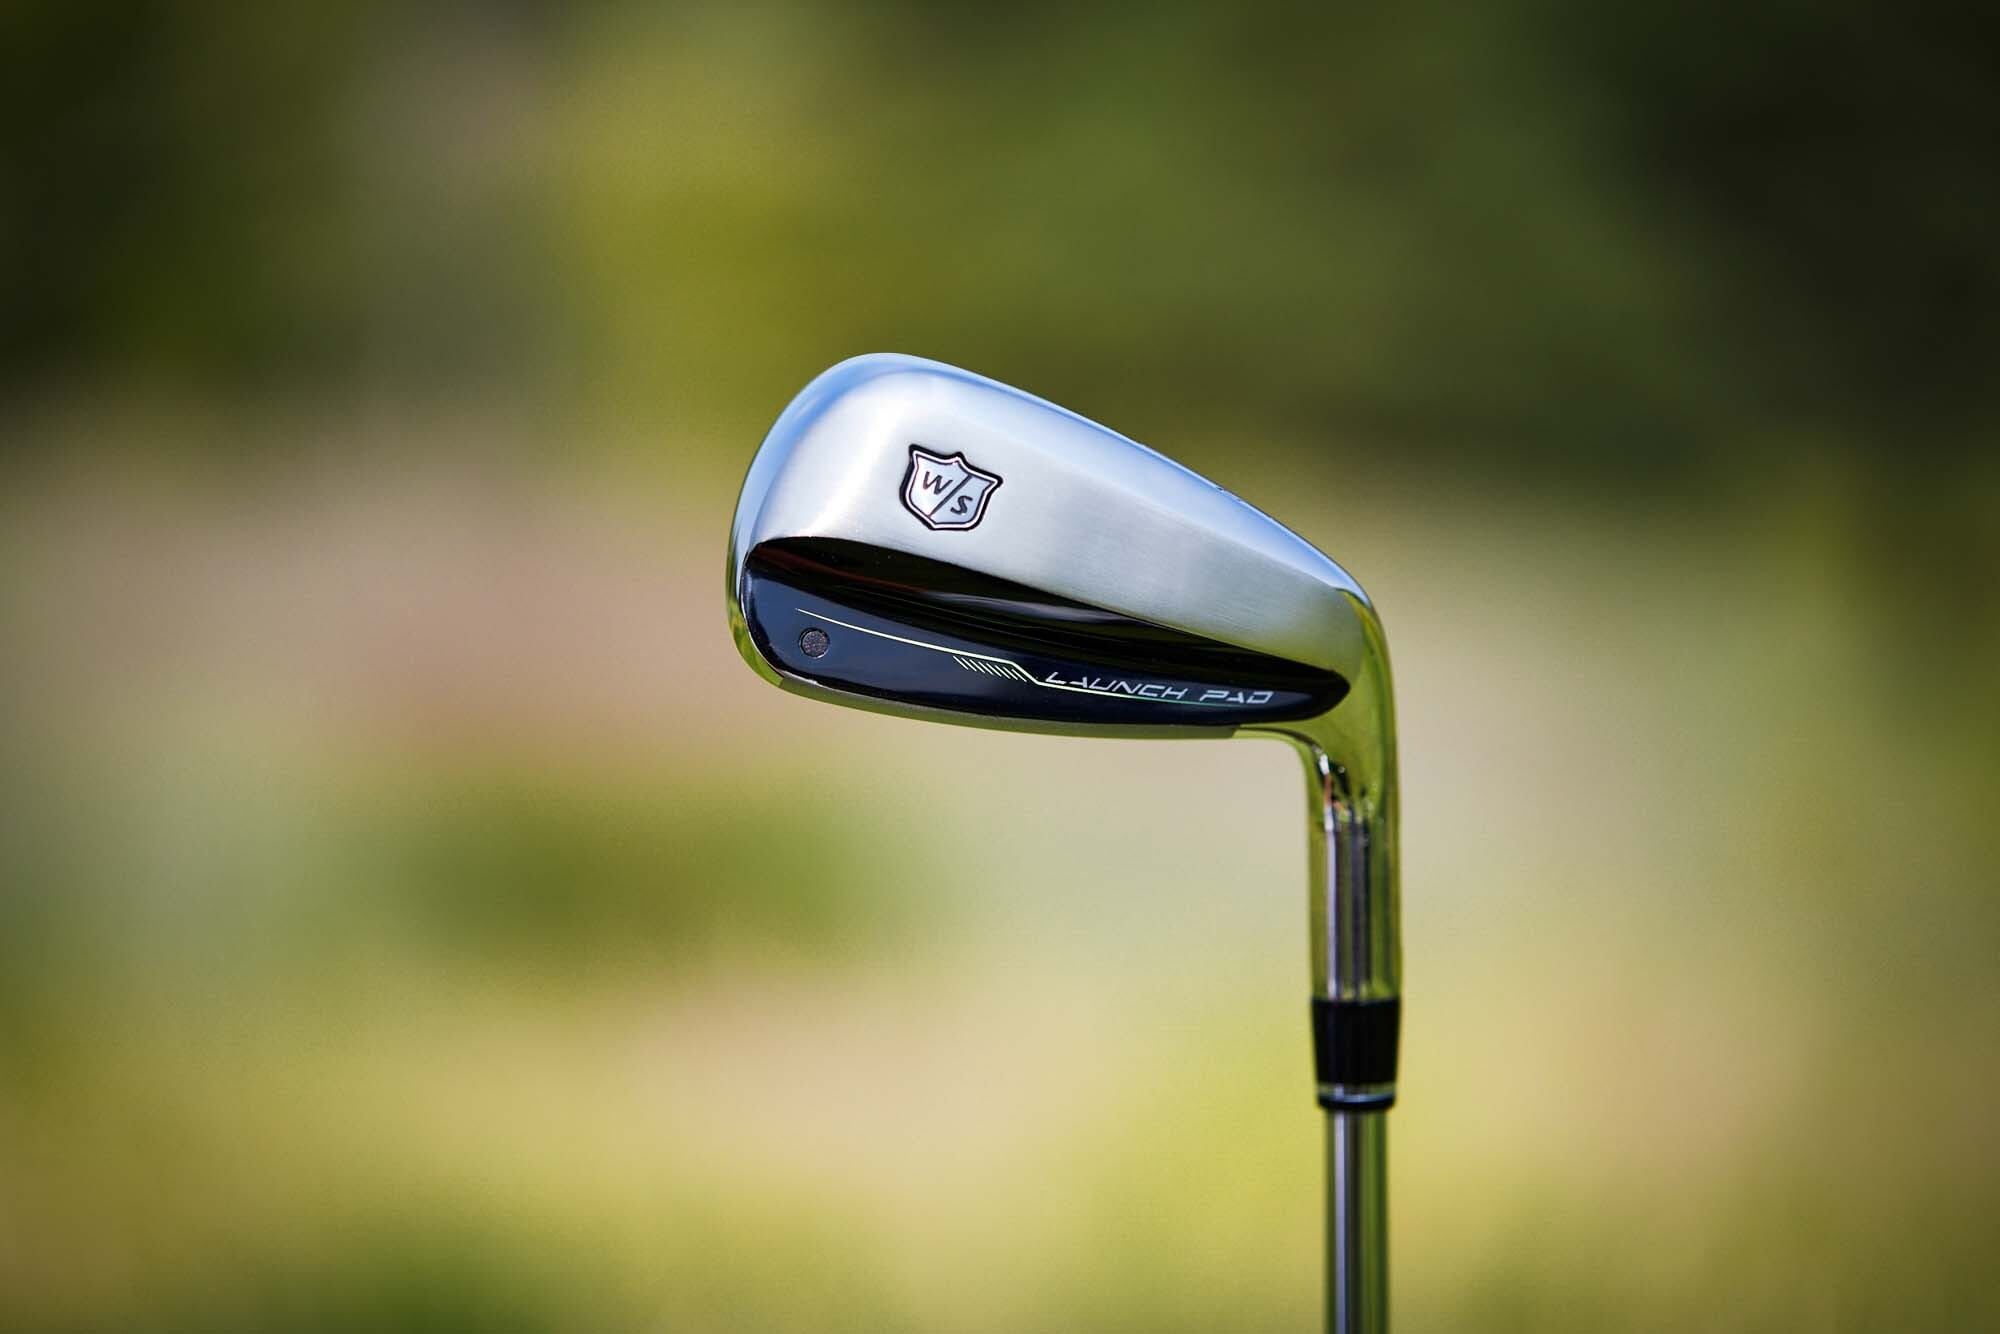 The Wilson Launch Pad 2 Irons are designed to provide enhanced forgiveness.